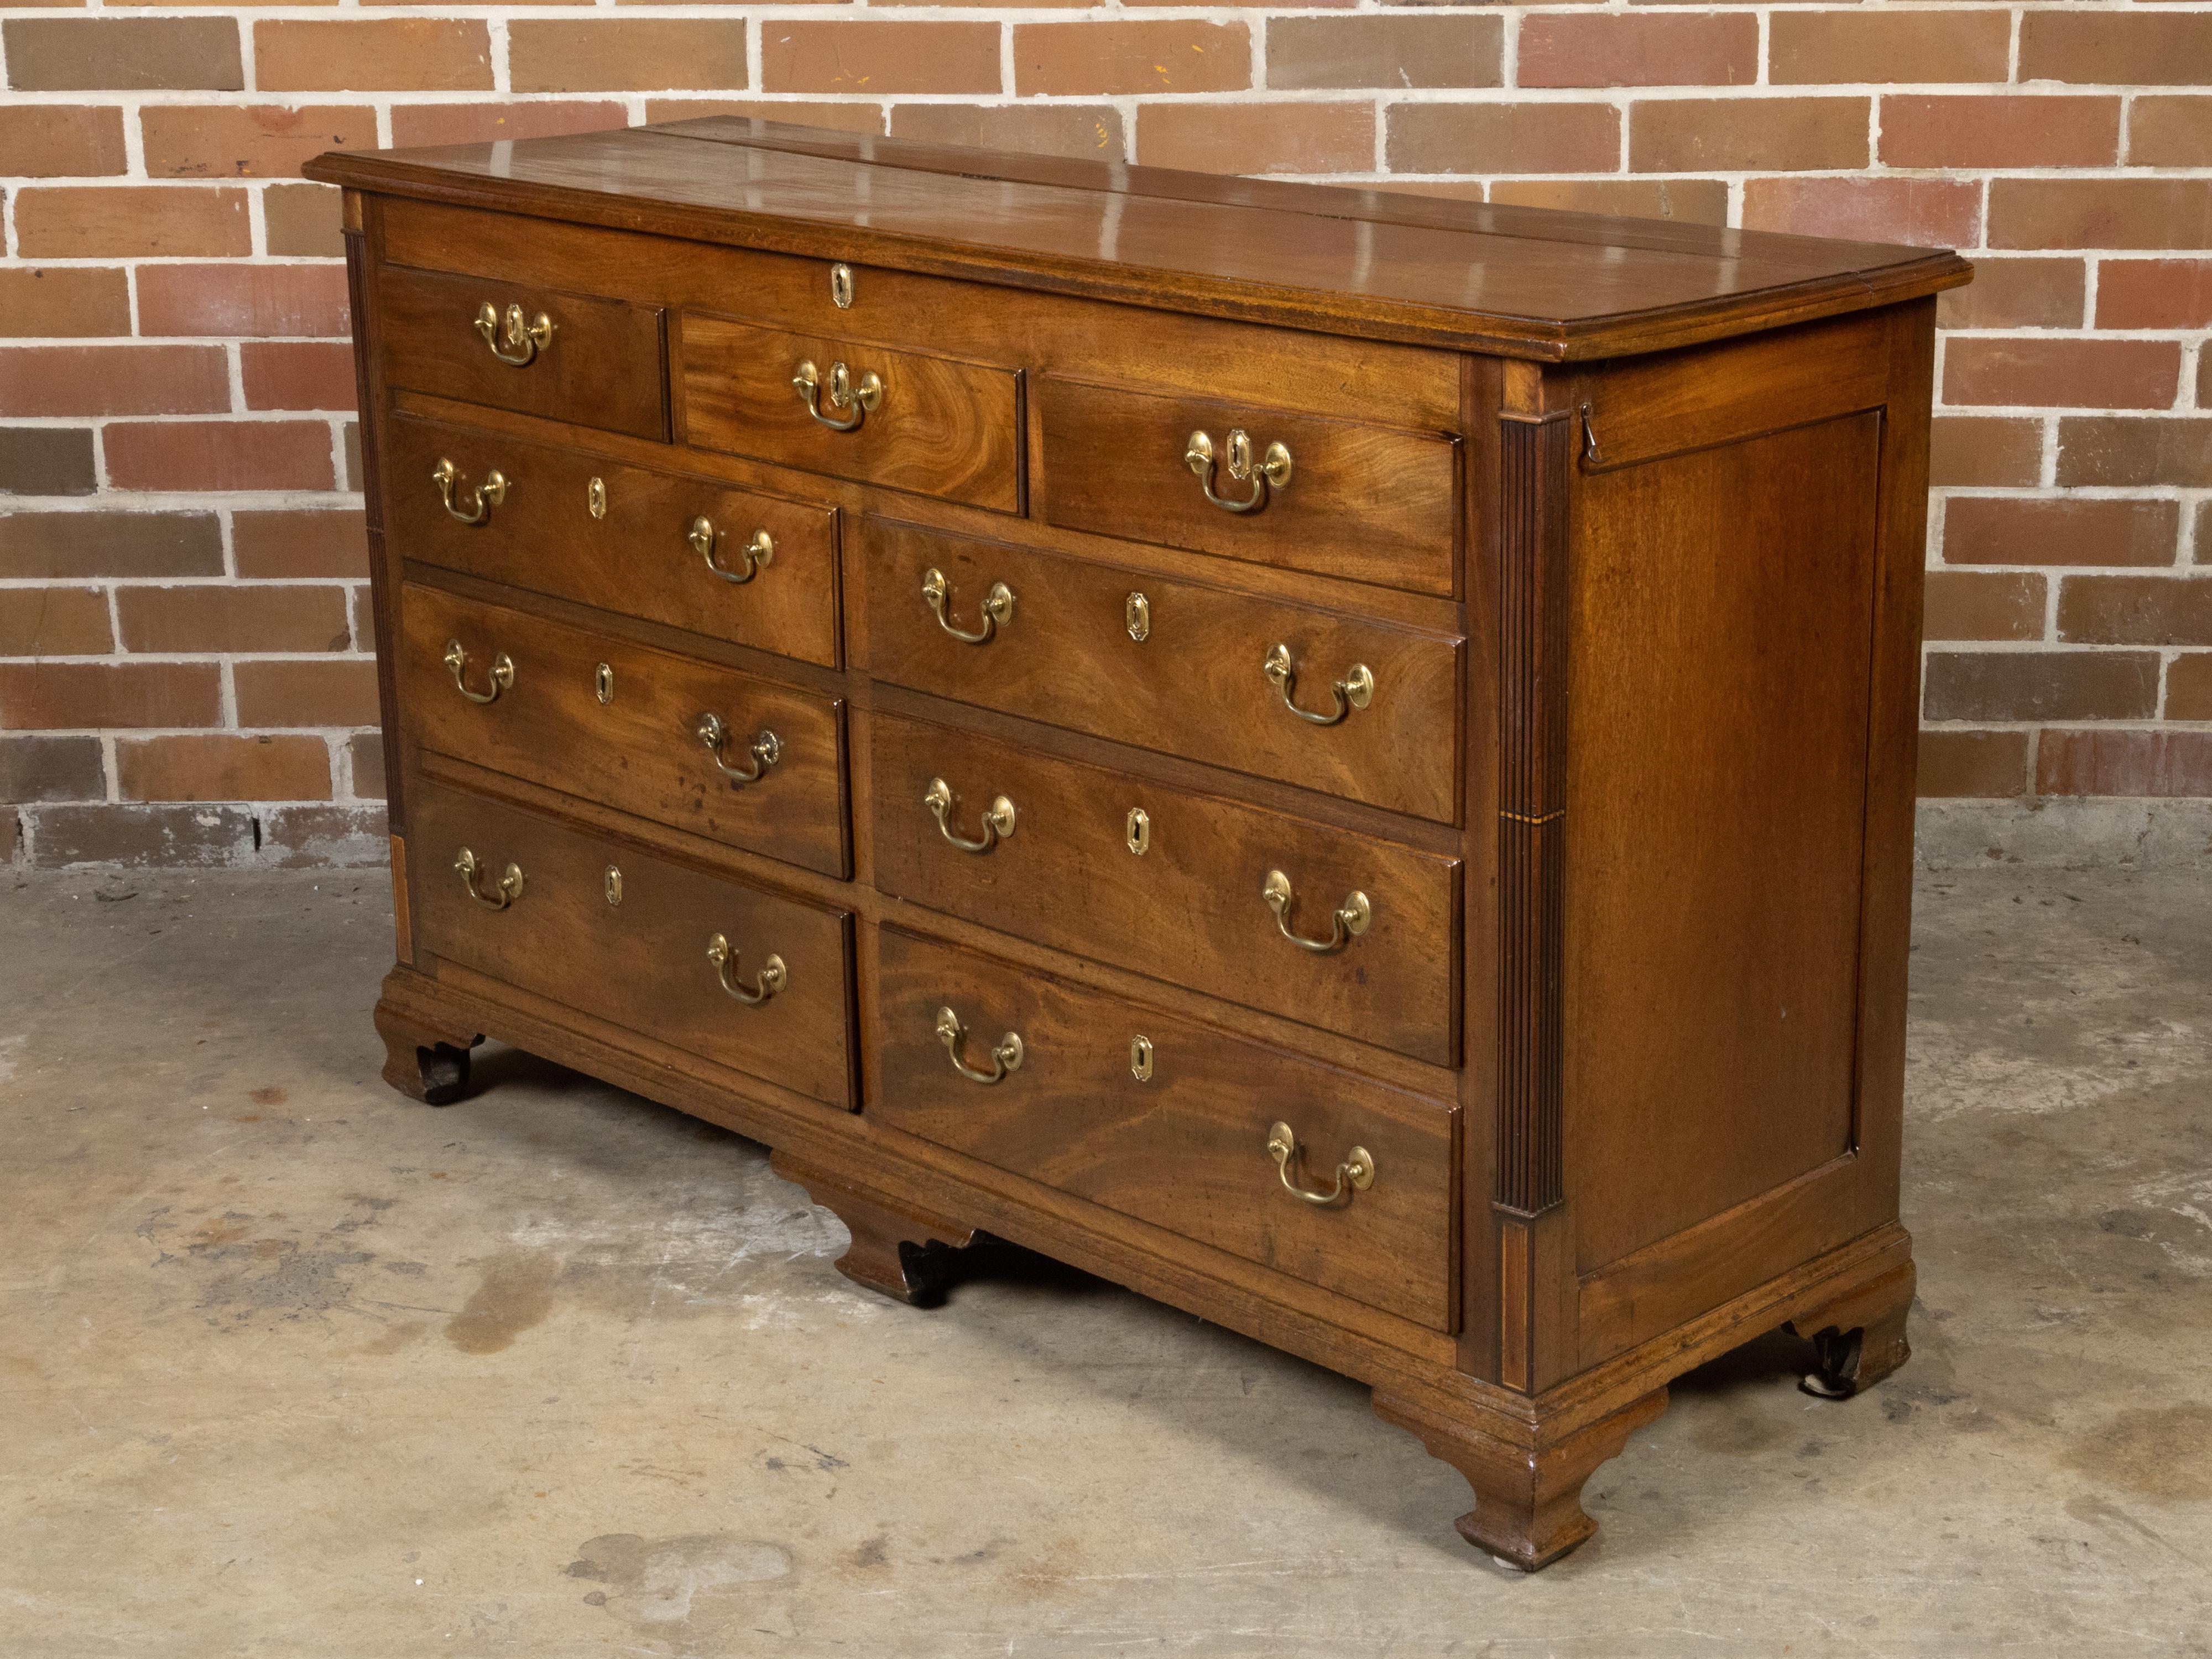 English Walnut 19th Century Flip Top Sideboard with Drawers and Brass Hardware For Sale 5